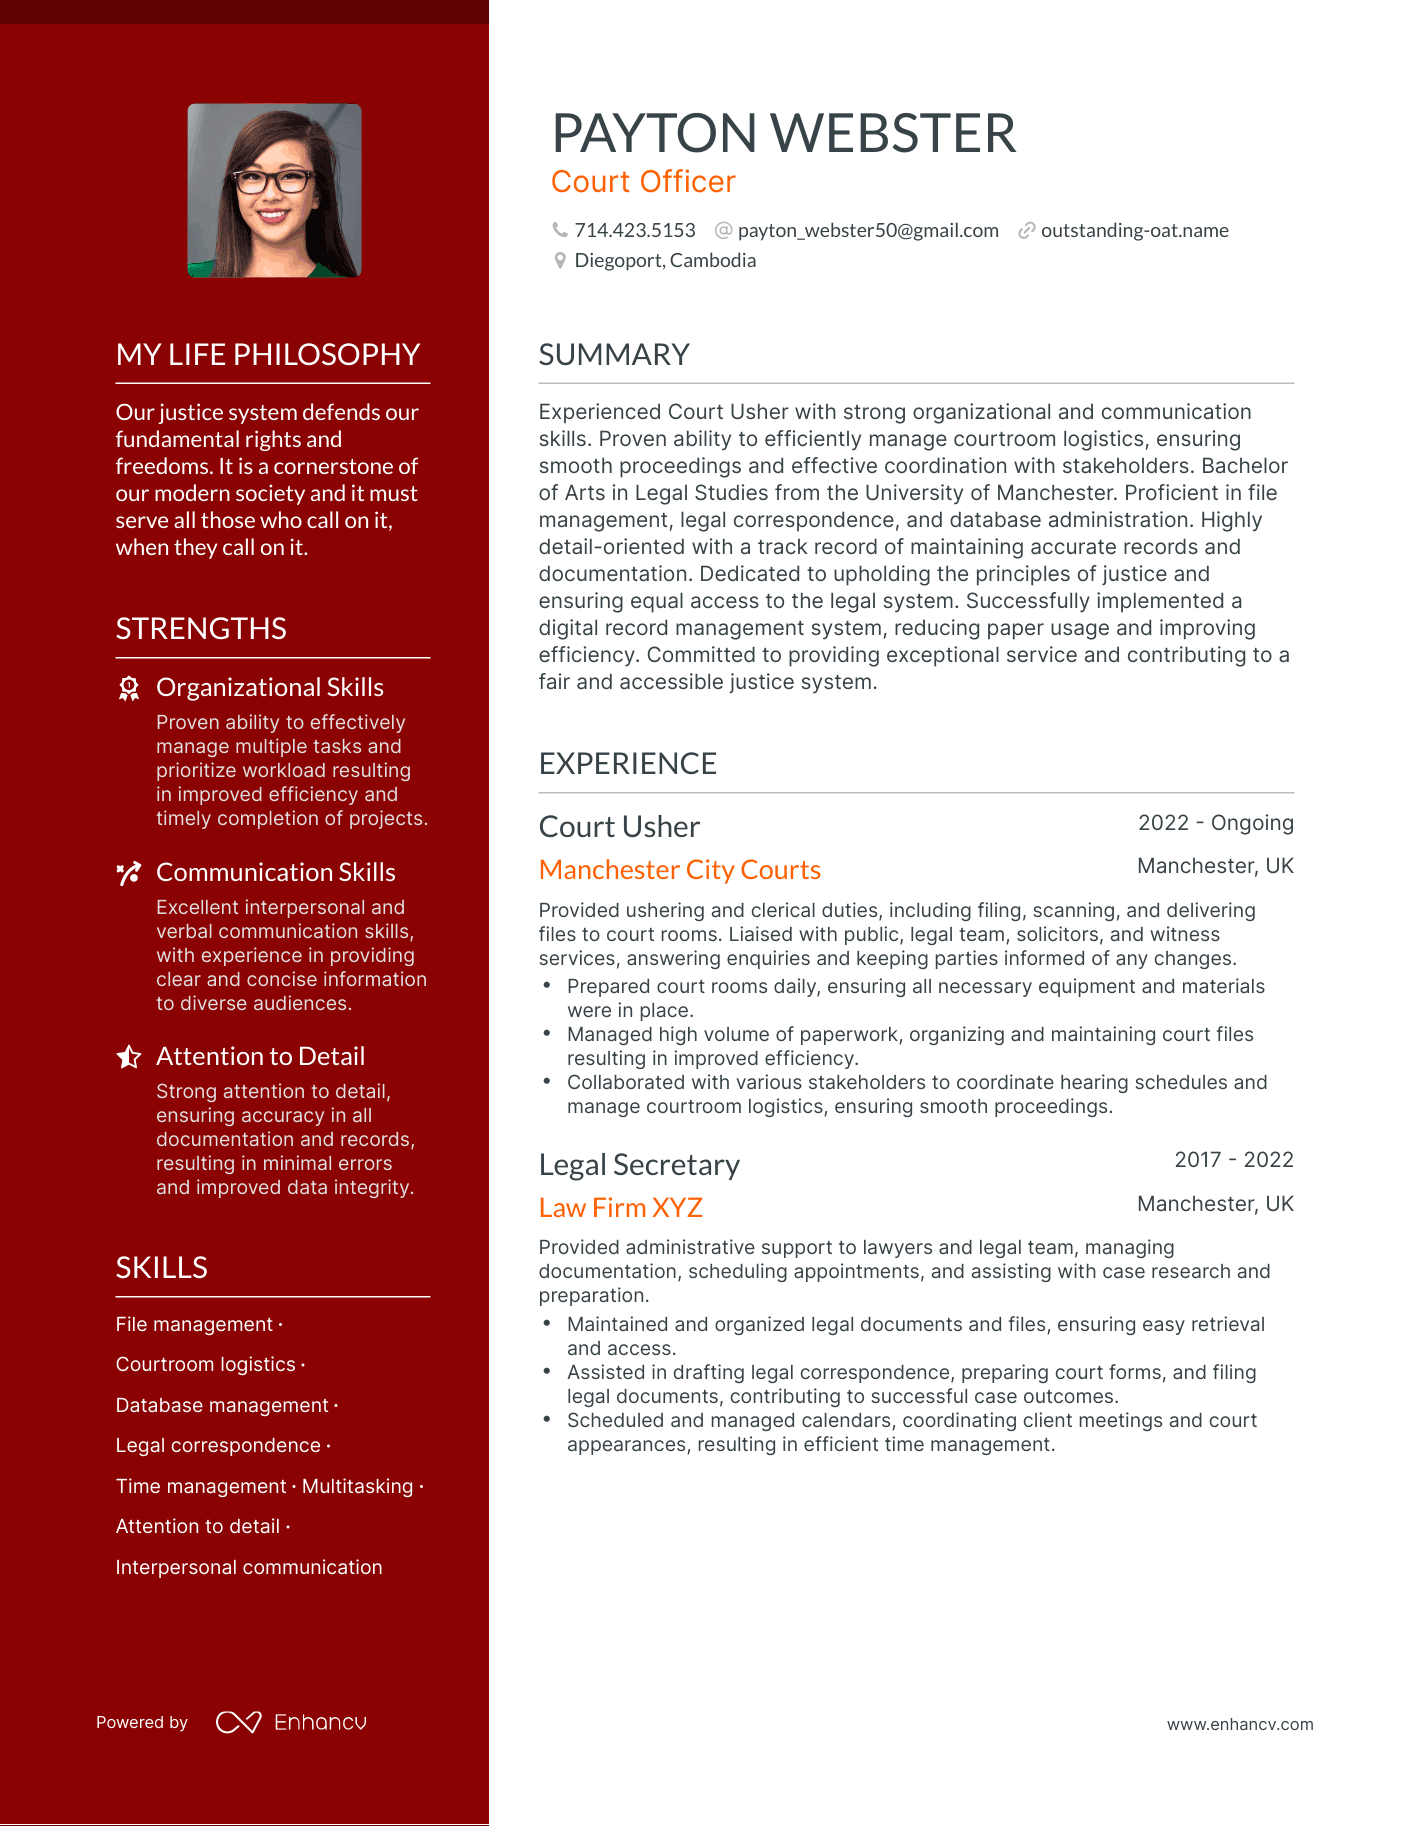 Creative Court Officer Resume Example